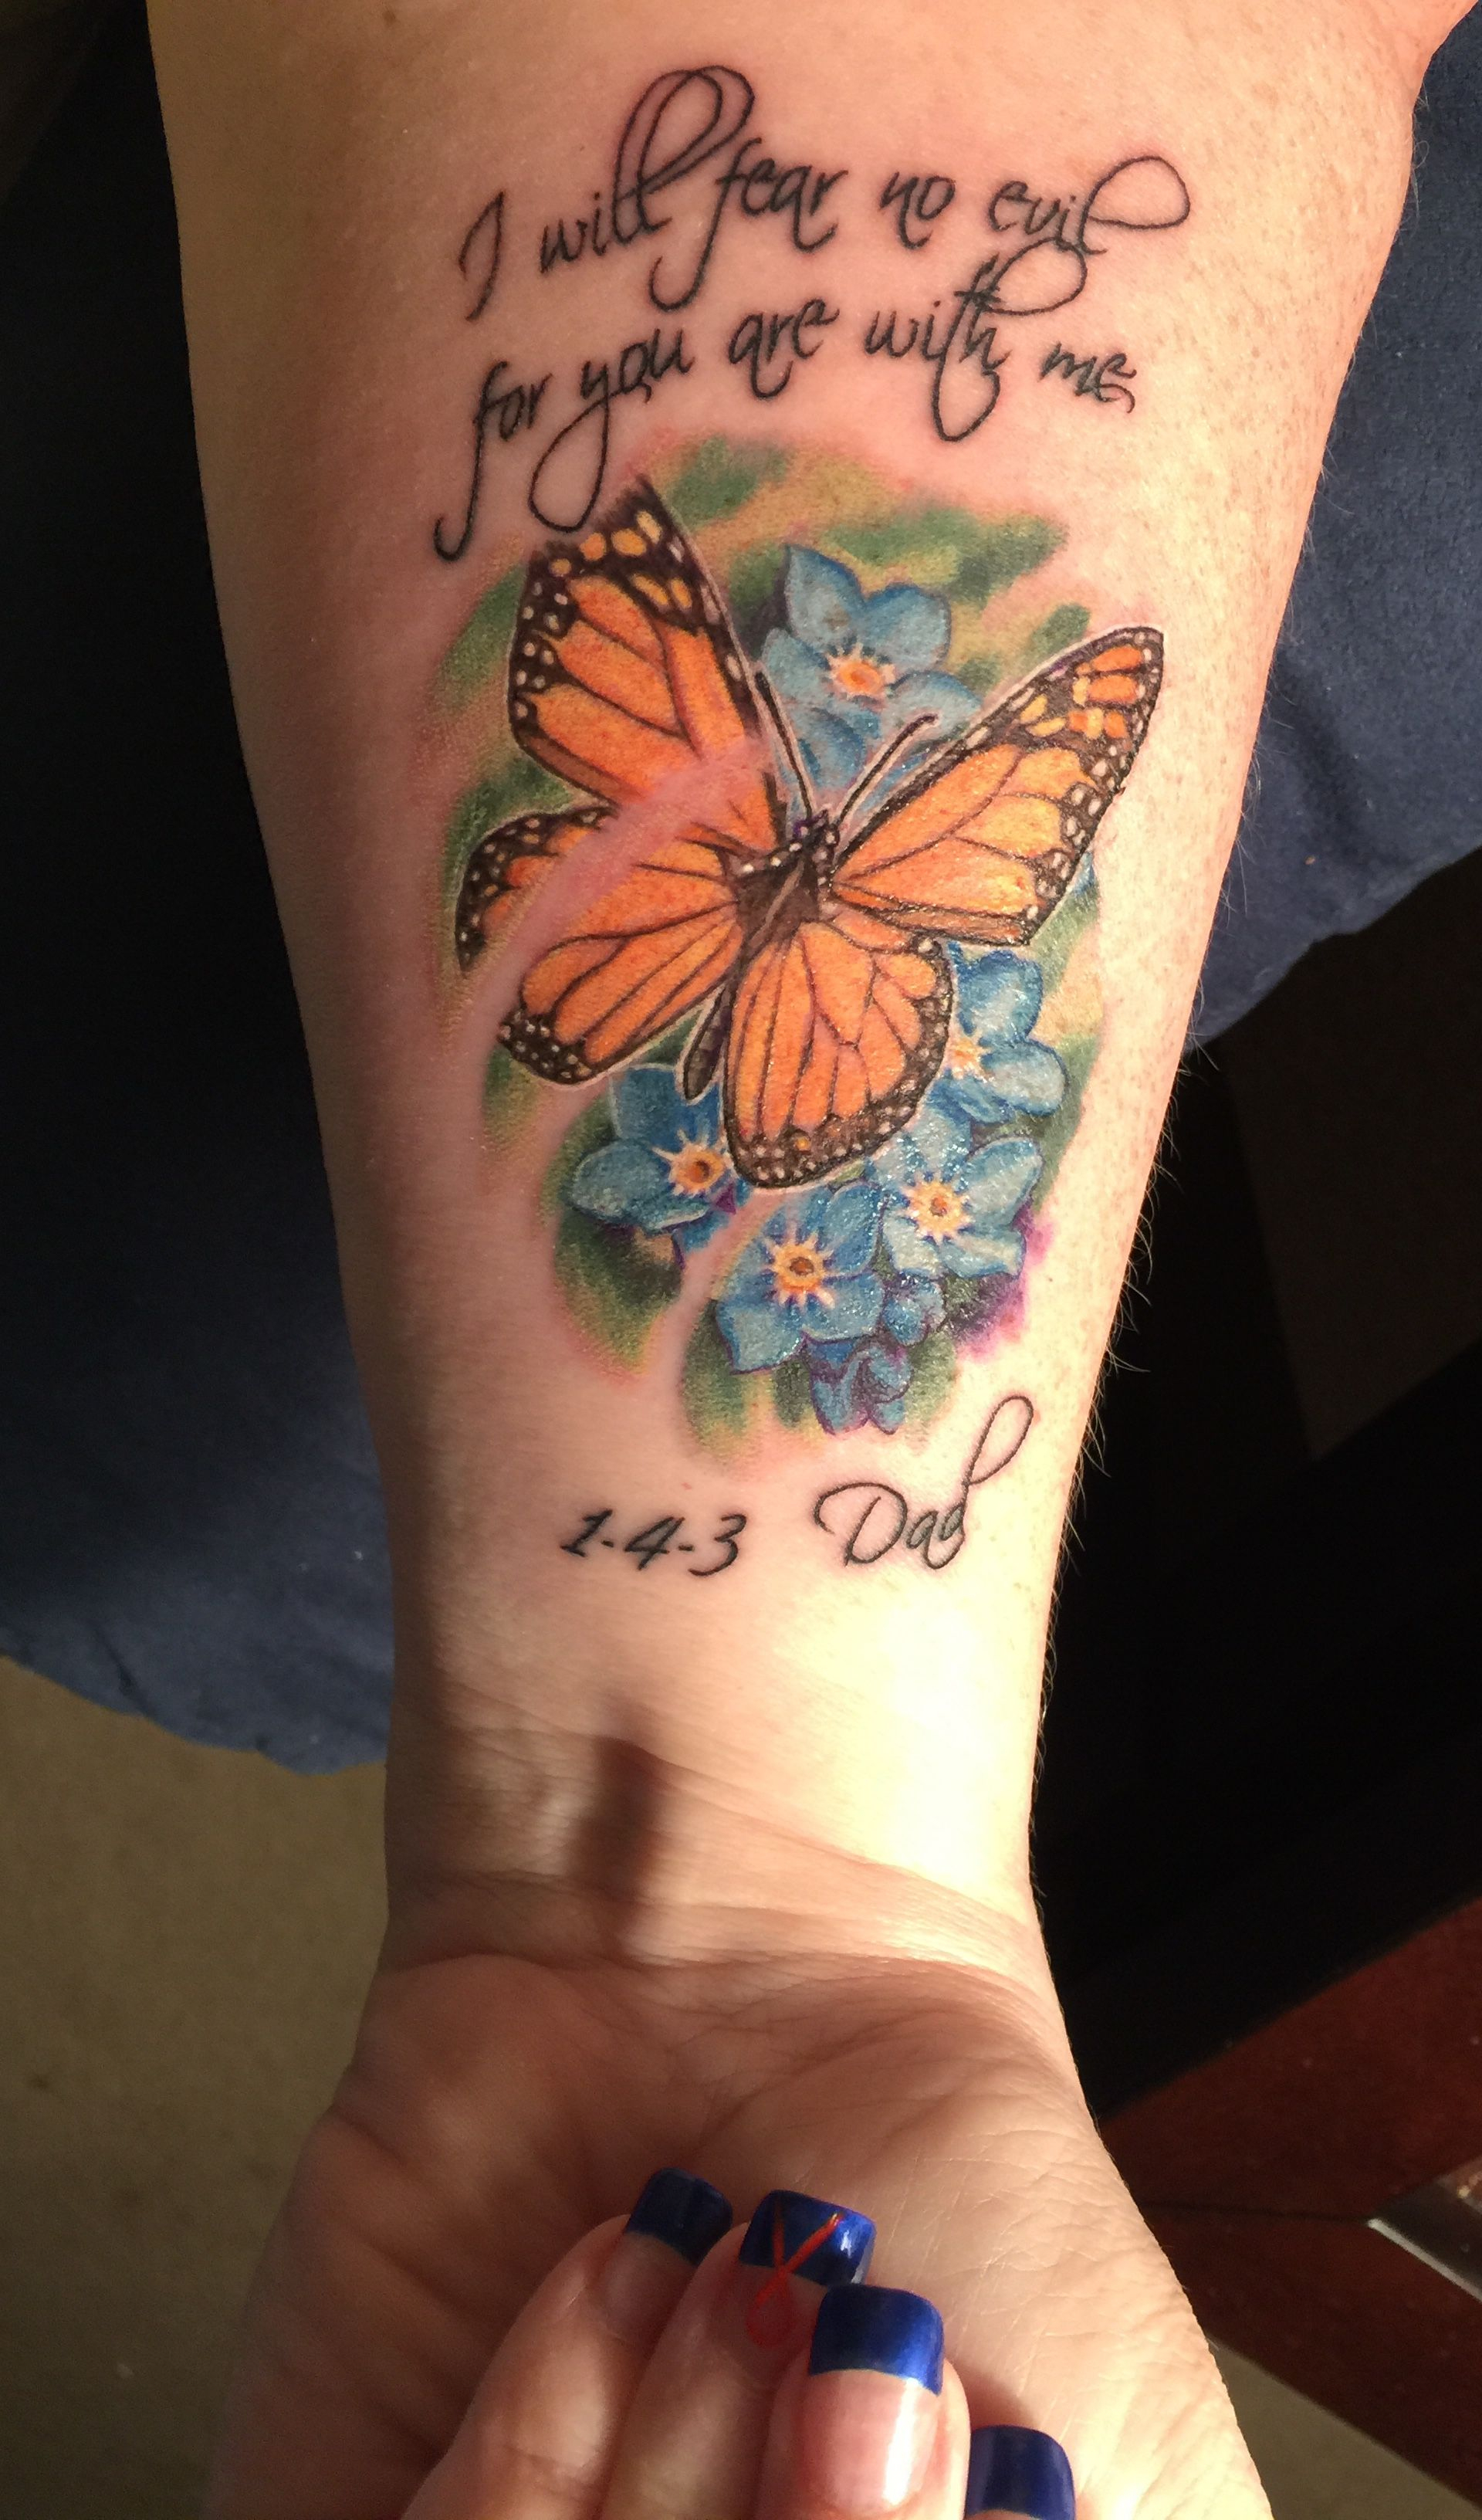 Butterfly Tattoo In Memory Of My Dad Tattoos That I Love in dimensions 1920 X 3264